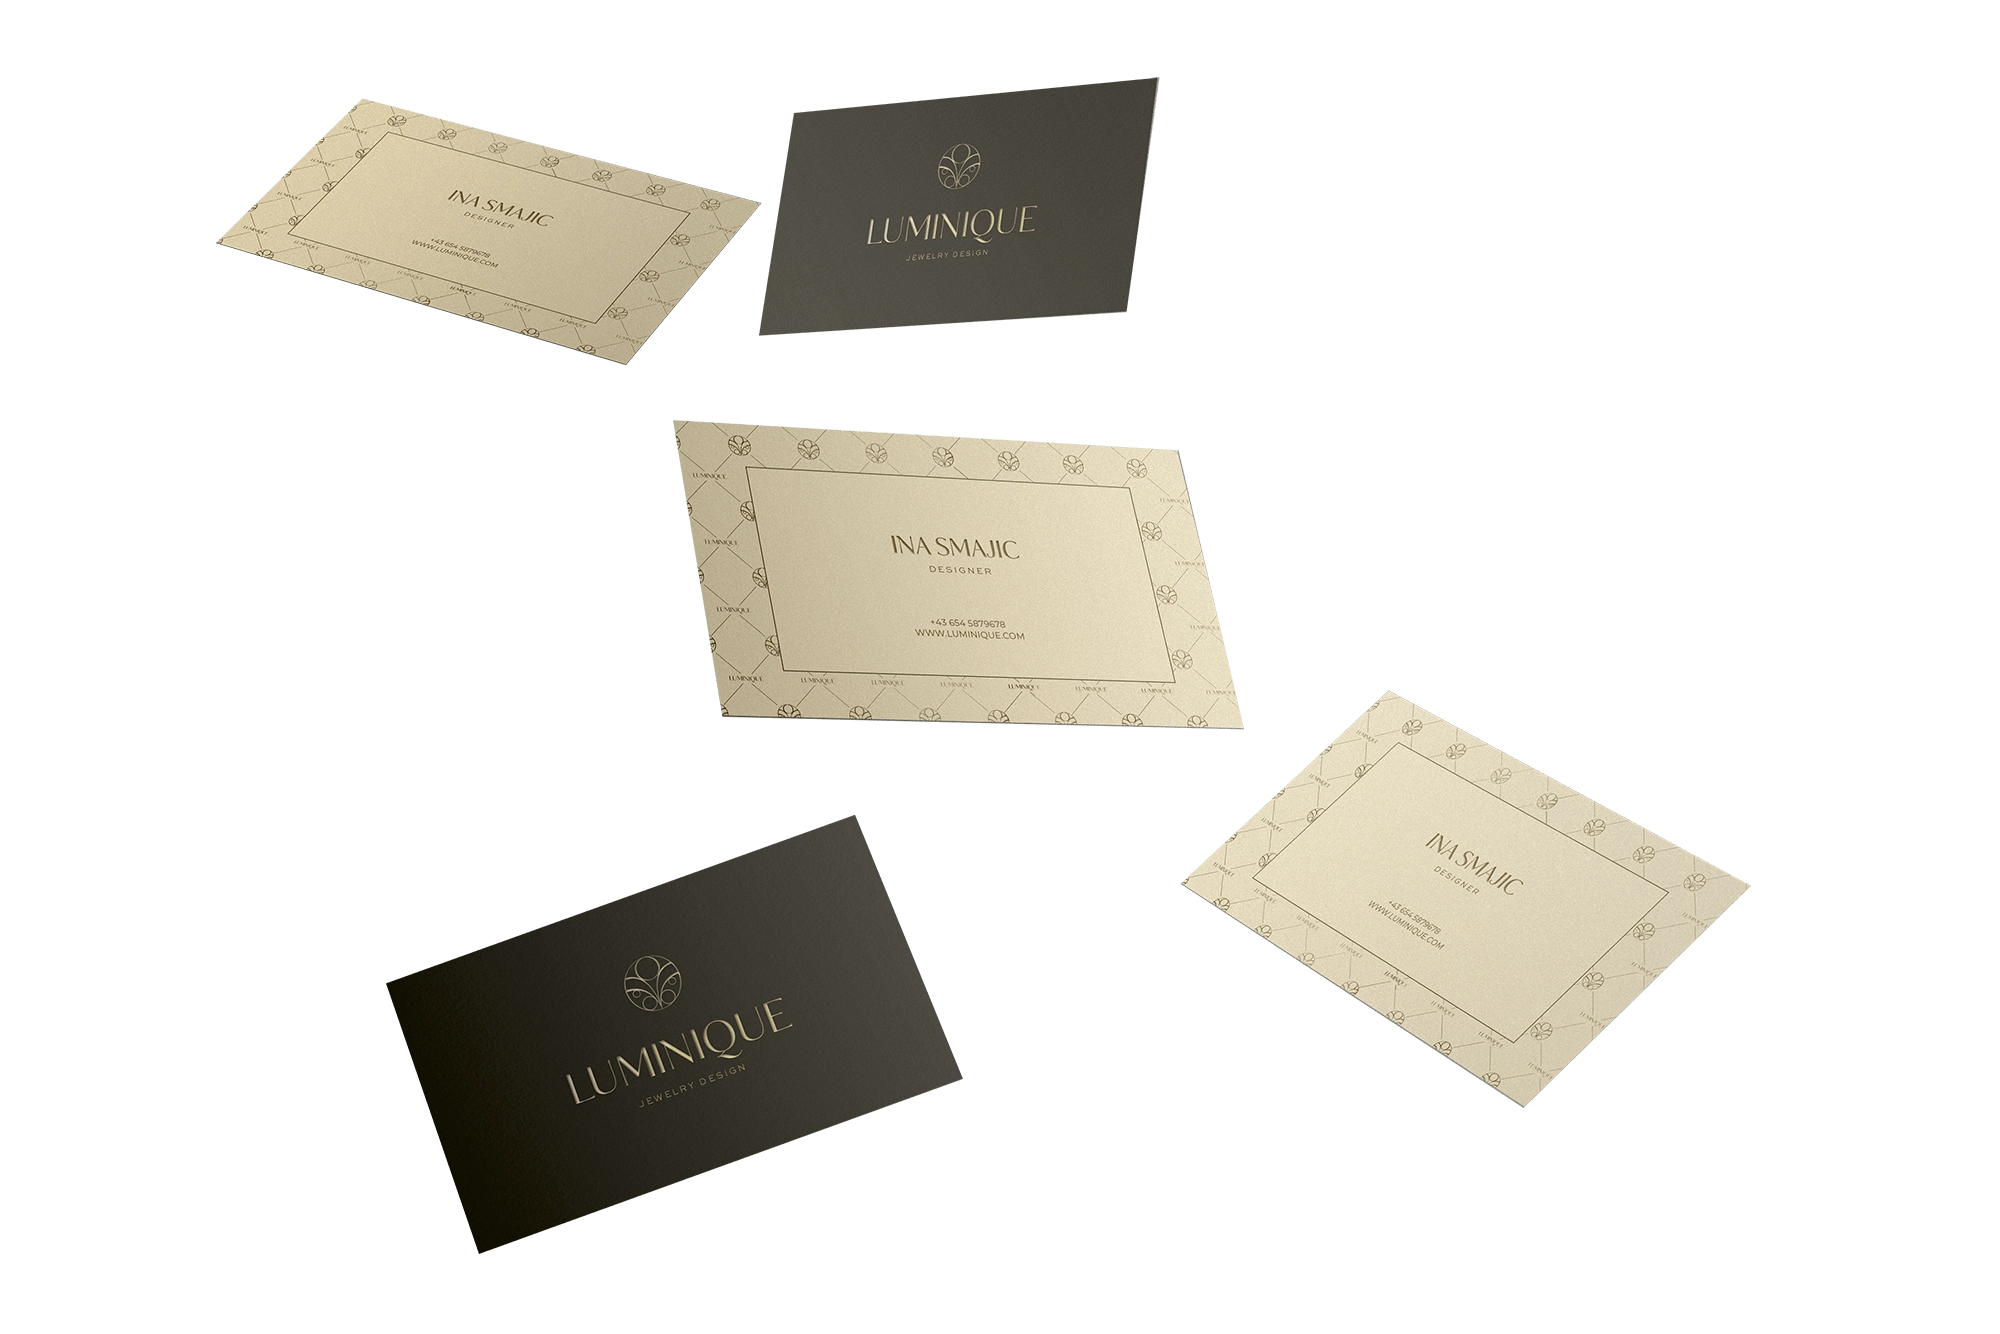 Business cards represent you in front of your clients and